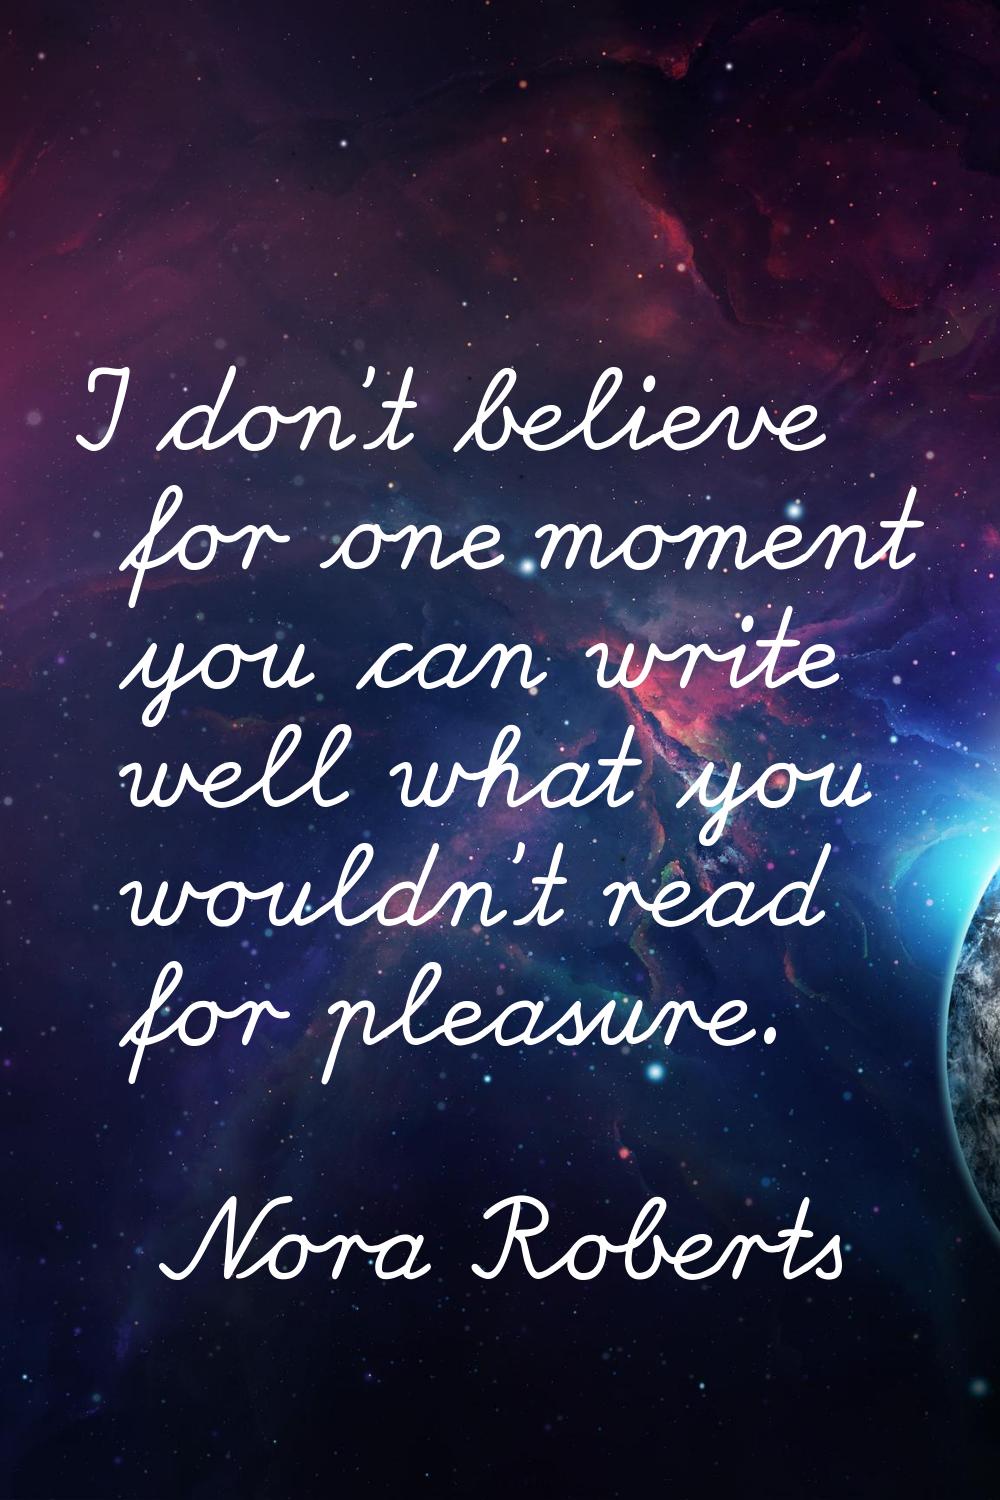 I don't believe for one moment you can write well what you wouldn't read for pleasure.